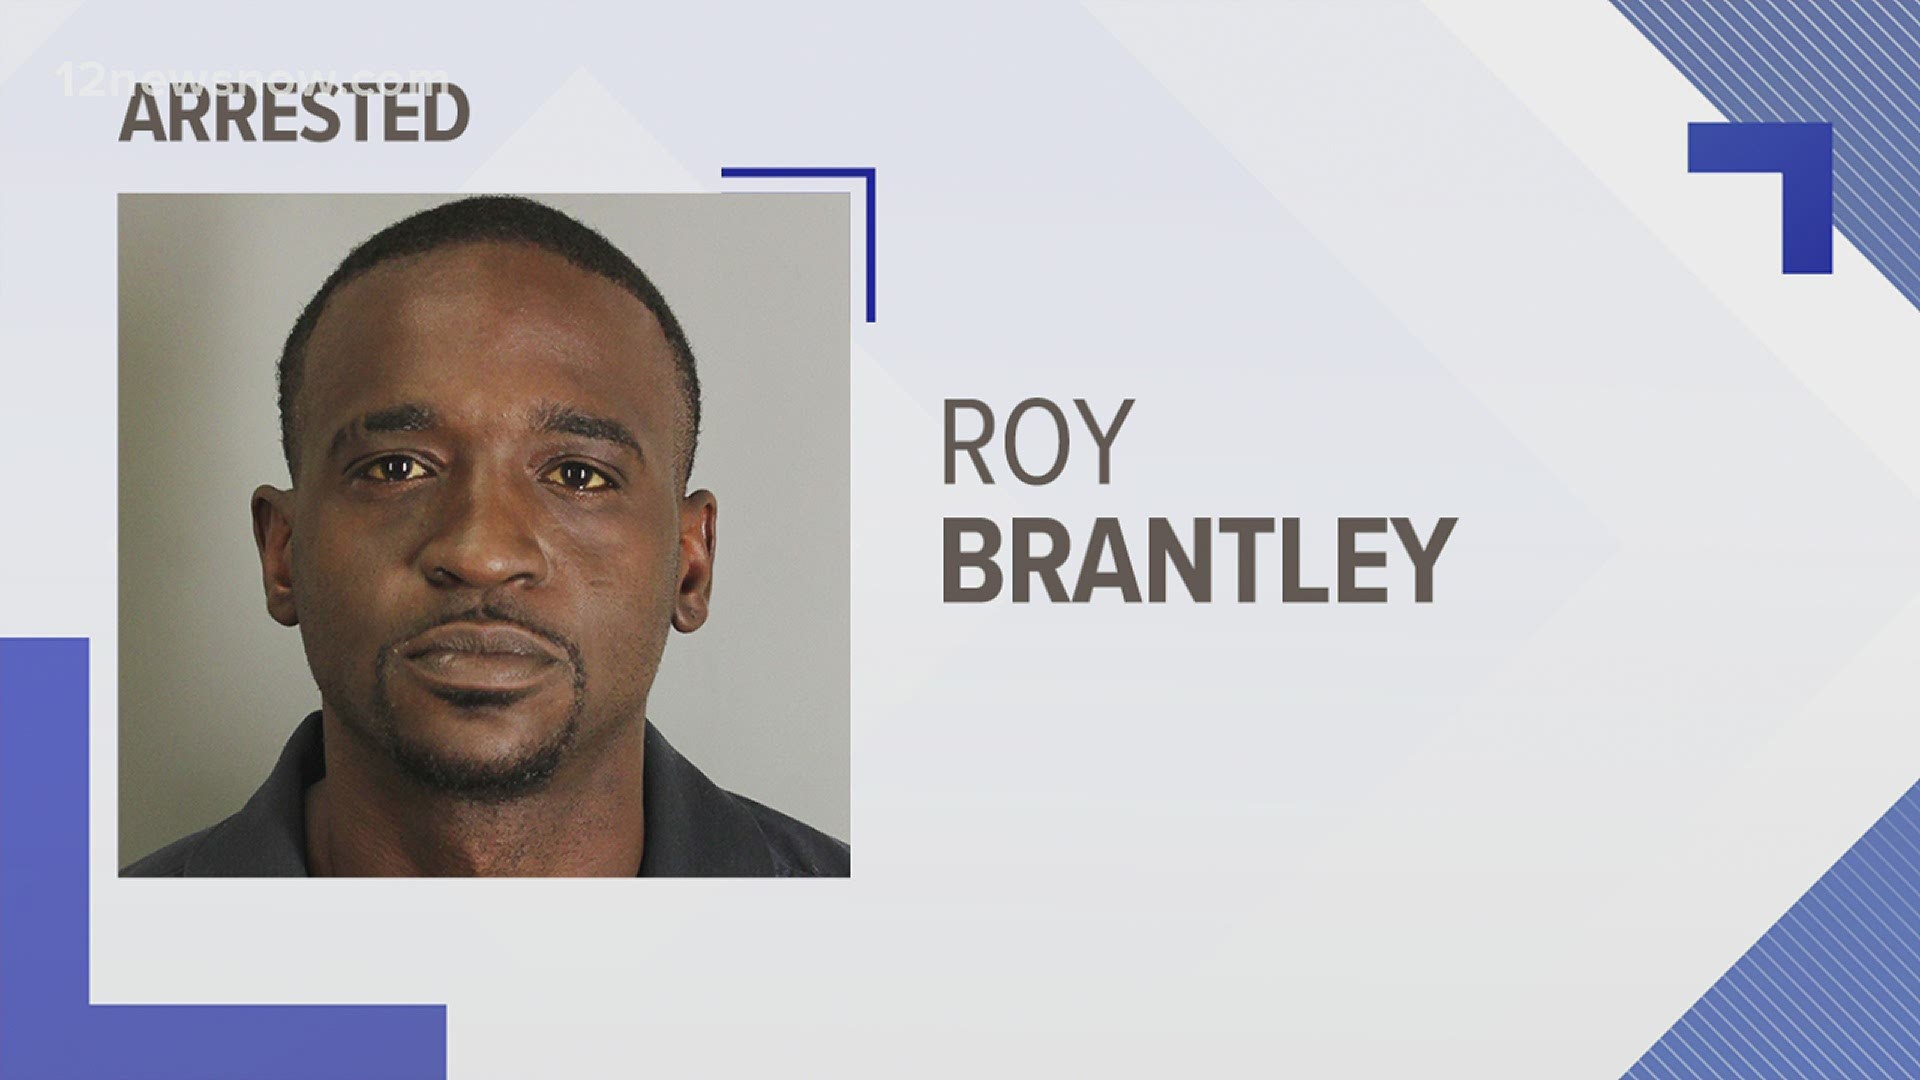 Officers say Roy Brantley was walking around with a large suitcase during a curfew and was found with stolen items